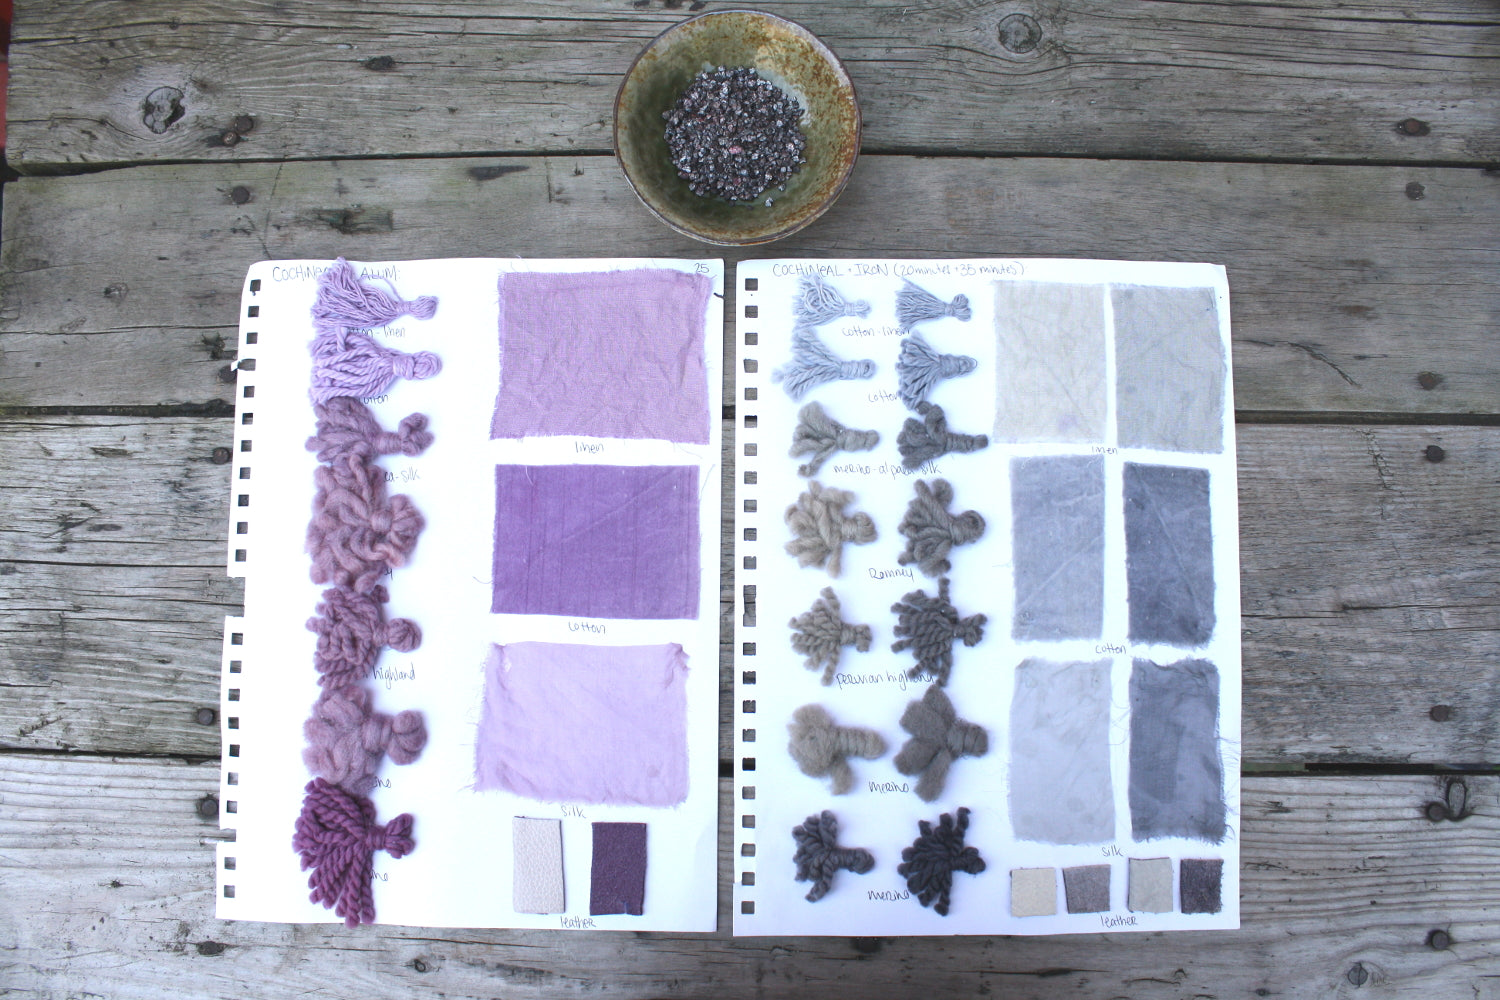 Cochineal Natural Dye, natural source of red, pink, and magenta